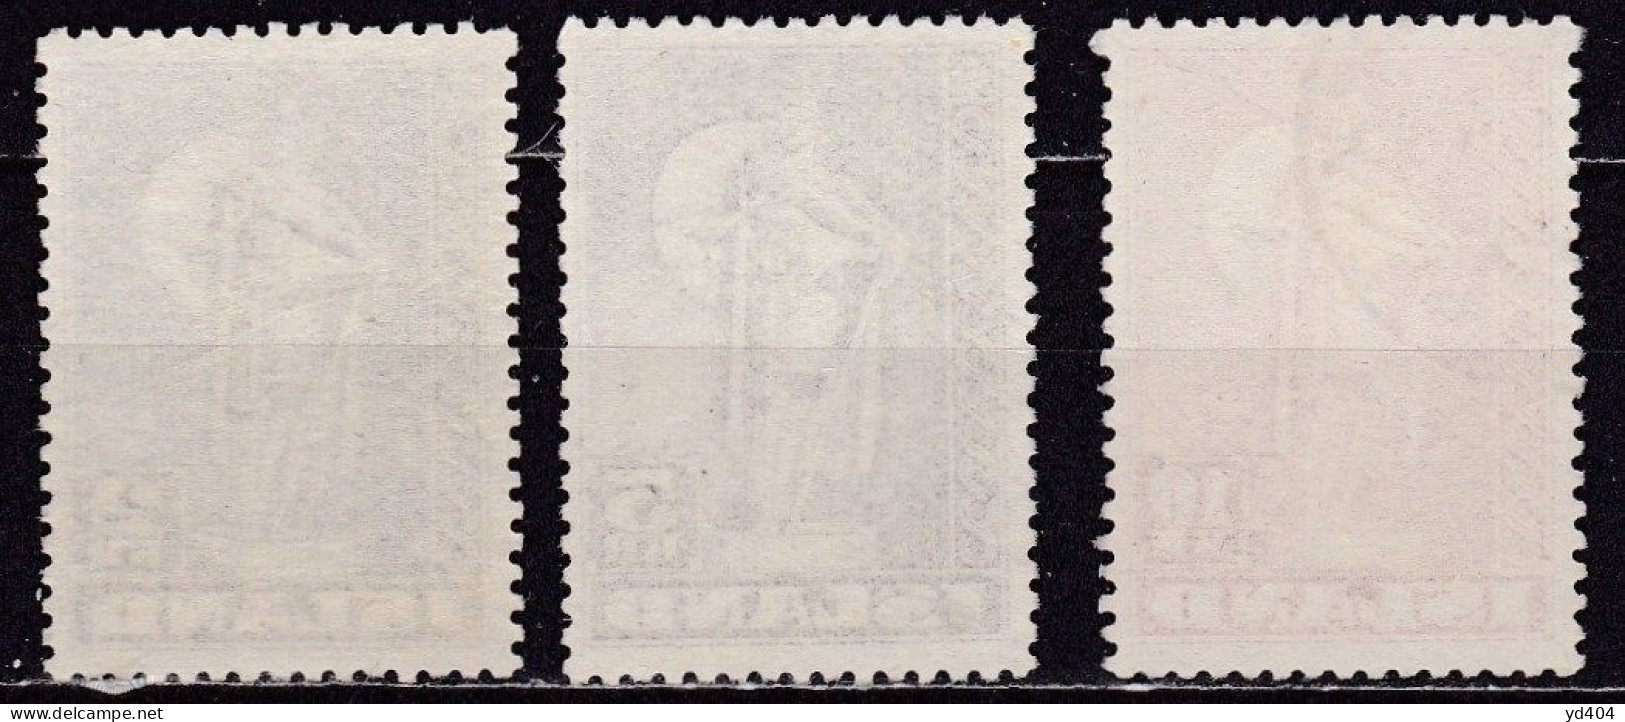 IS040 – ISLANDE – ICELAND – 1939-43 – STATUE OF KARLSEFNI – SC # 229a/31a USED 45 € - Used Stamps